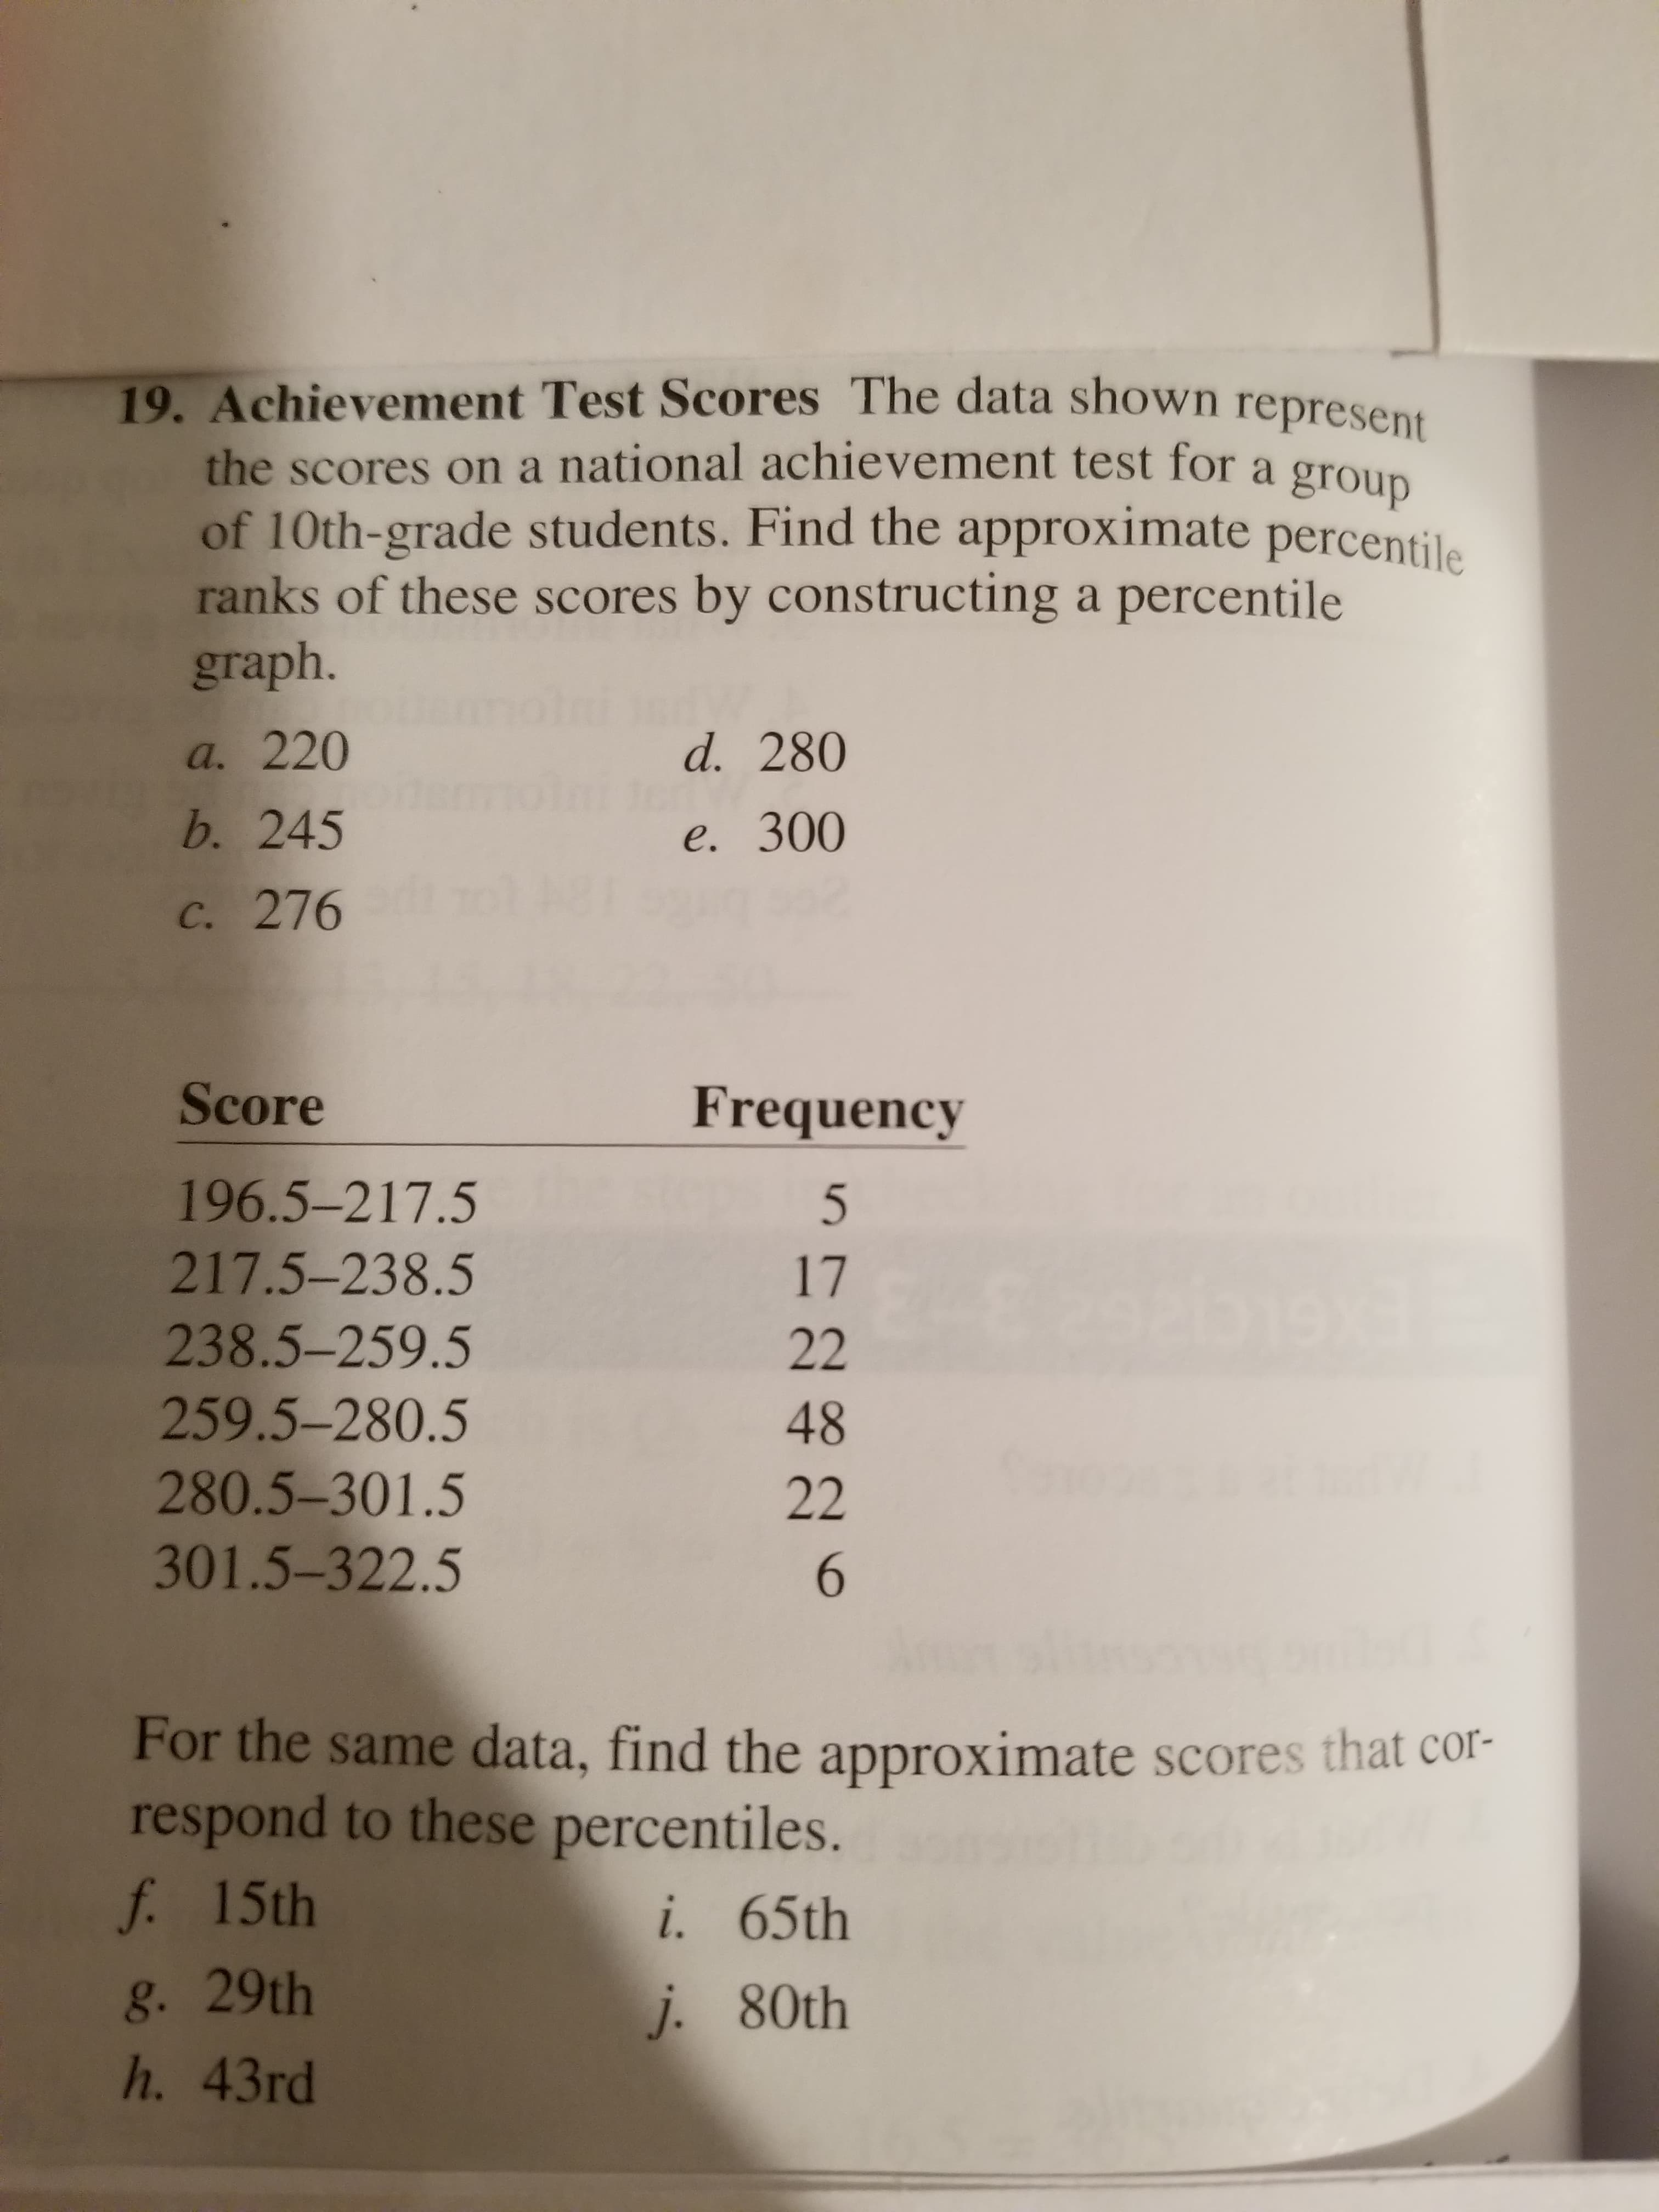 19. Achievement Test Scores The data shown represen
the scores on a national achievement test for a group
of 10th-grade students. Find the approximate percentile
ranks of these scores by constructing a percentile
graph.
a. 220
b. 245
c. 276
d. 280
e. 300
Score
196.5-217.5
217.5-238.5
238.5-259.5
259.5-280.5
280.5-301.5
301.5-322.5
Frequency
17
48
For the same data, find the approximate scores that cor-
respond to these percentiles.
f 15th
g. 29th
h. 43rd
i. 65th
j. 80th
